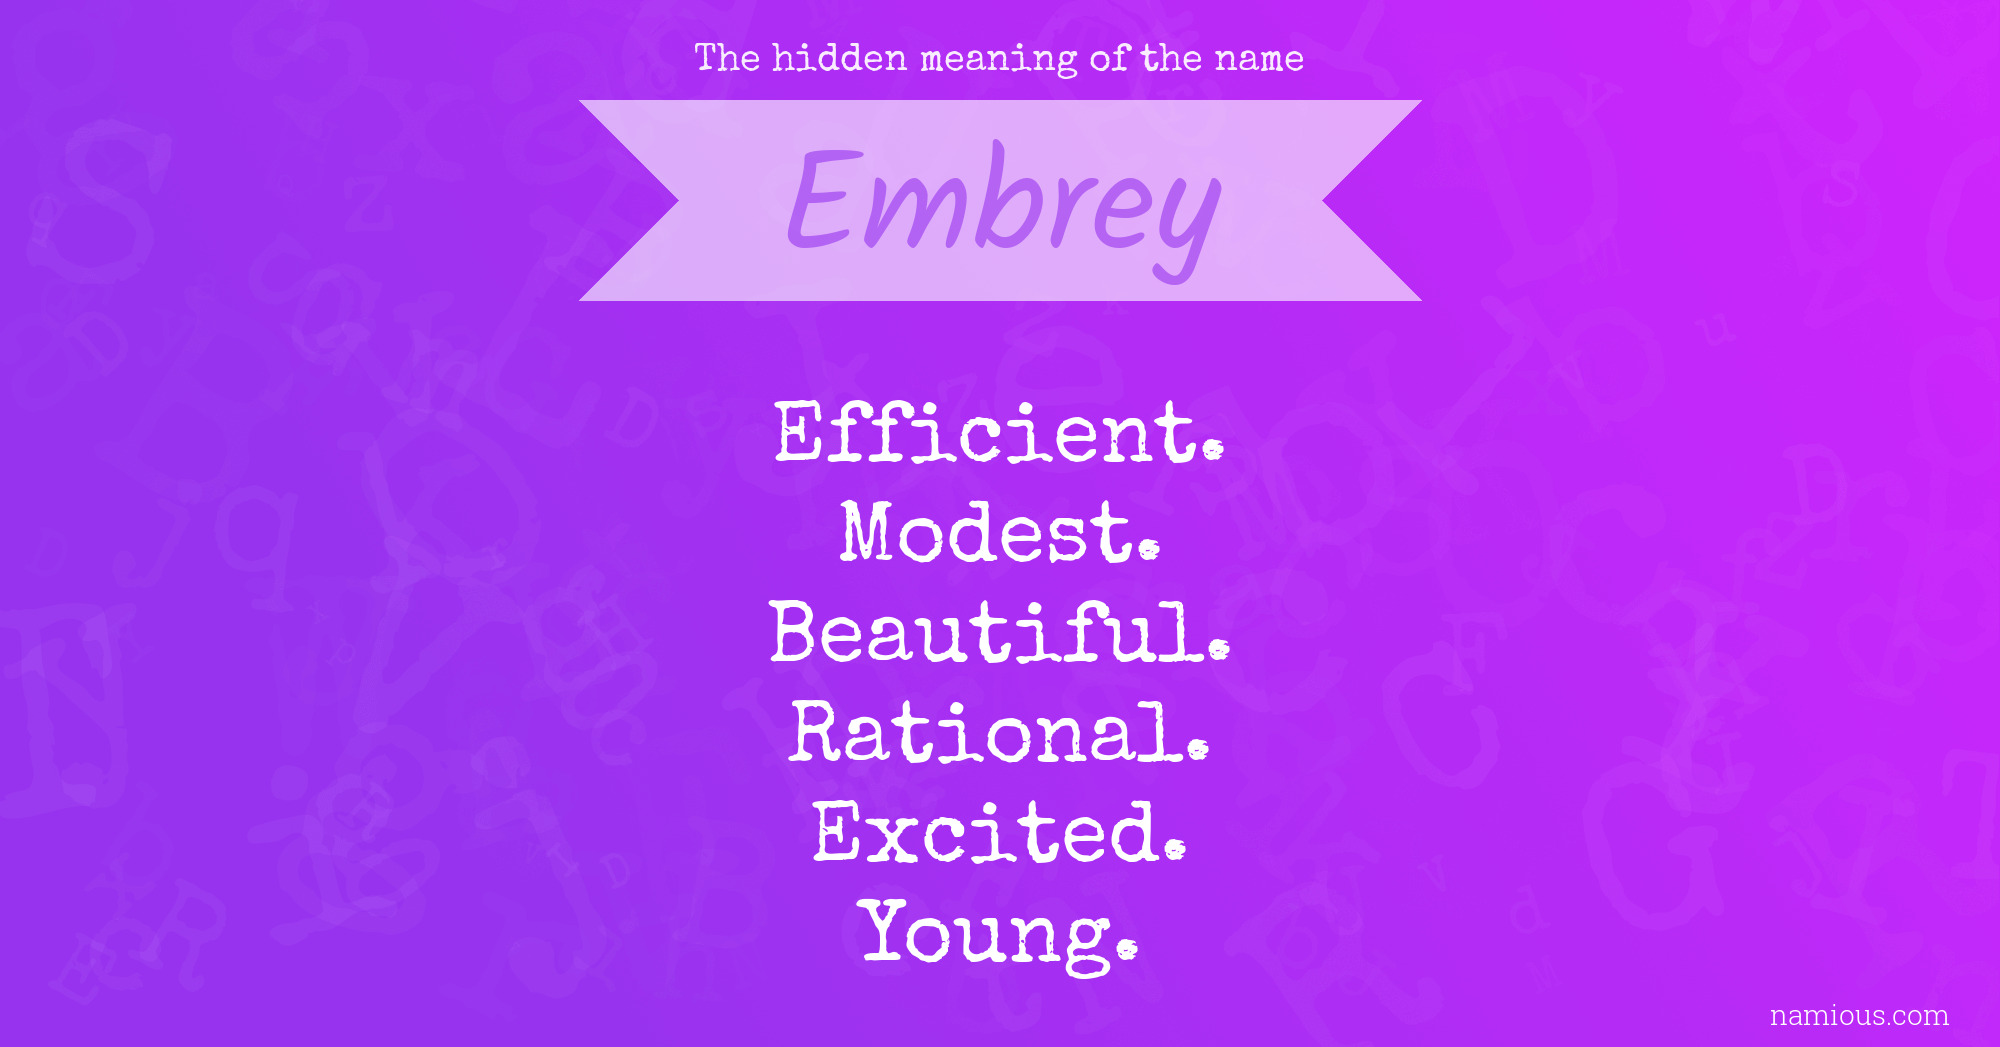 The hidden meaning of the name Embrey